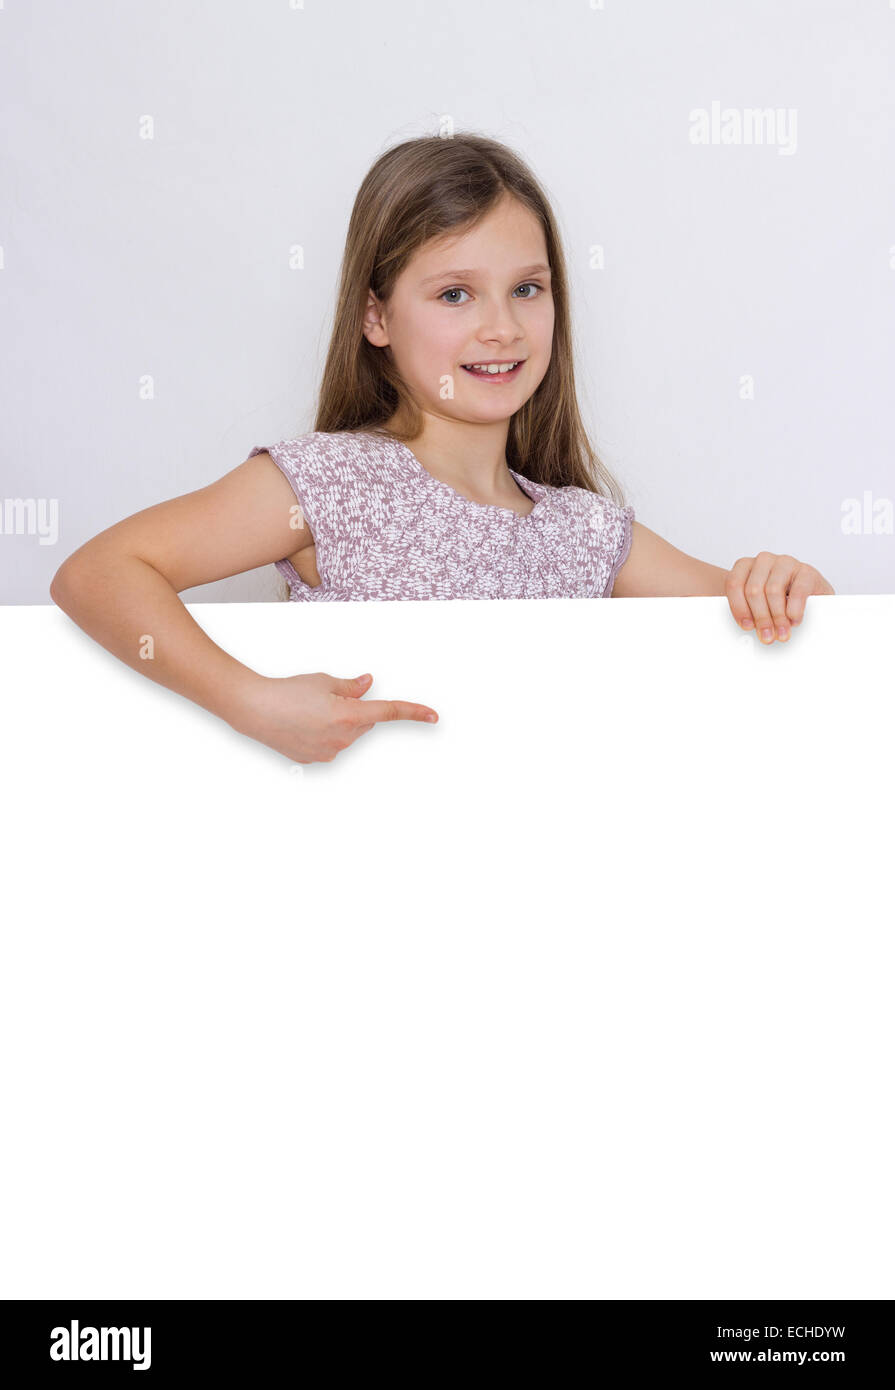 A girl shows on a white board Stock Photo